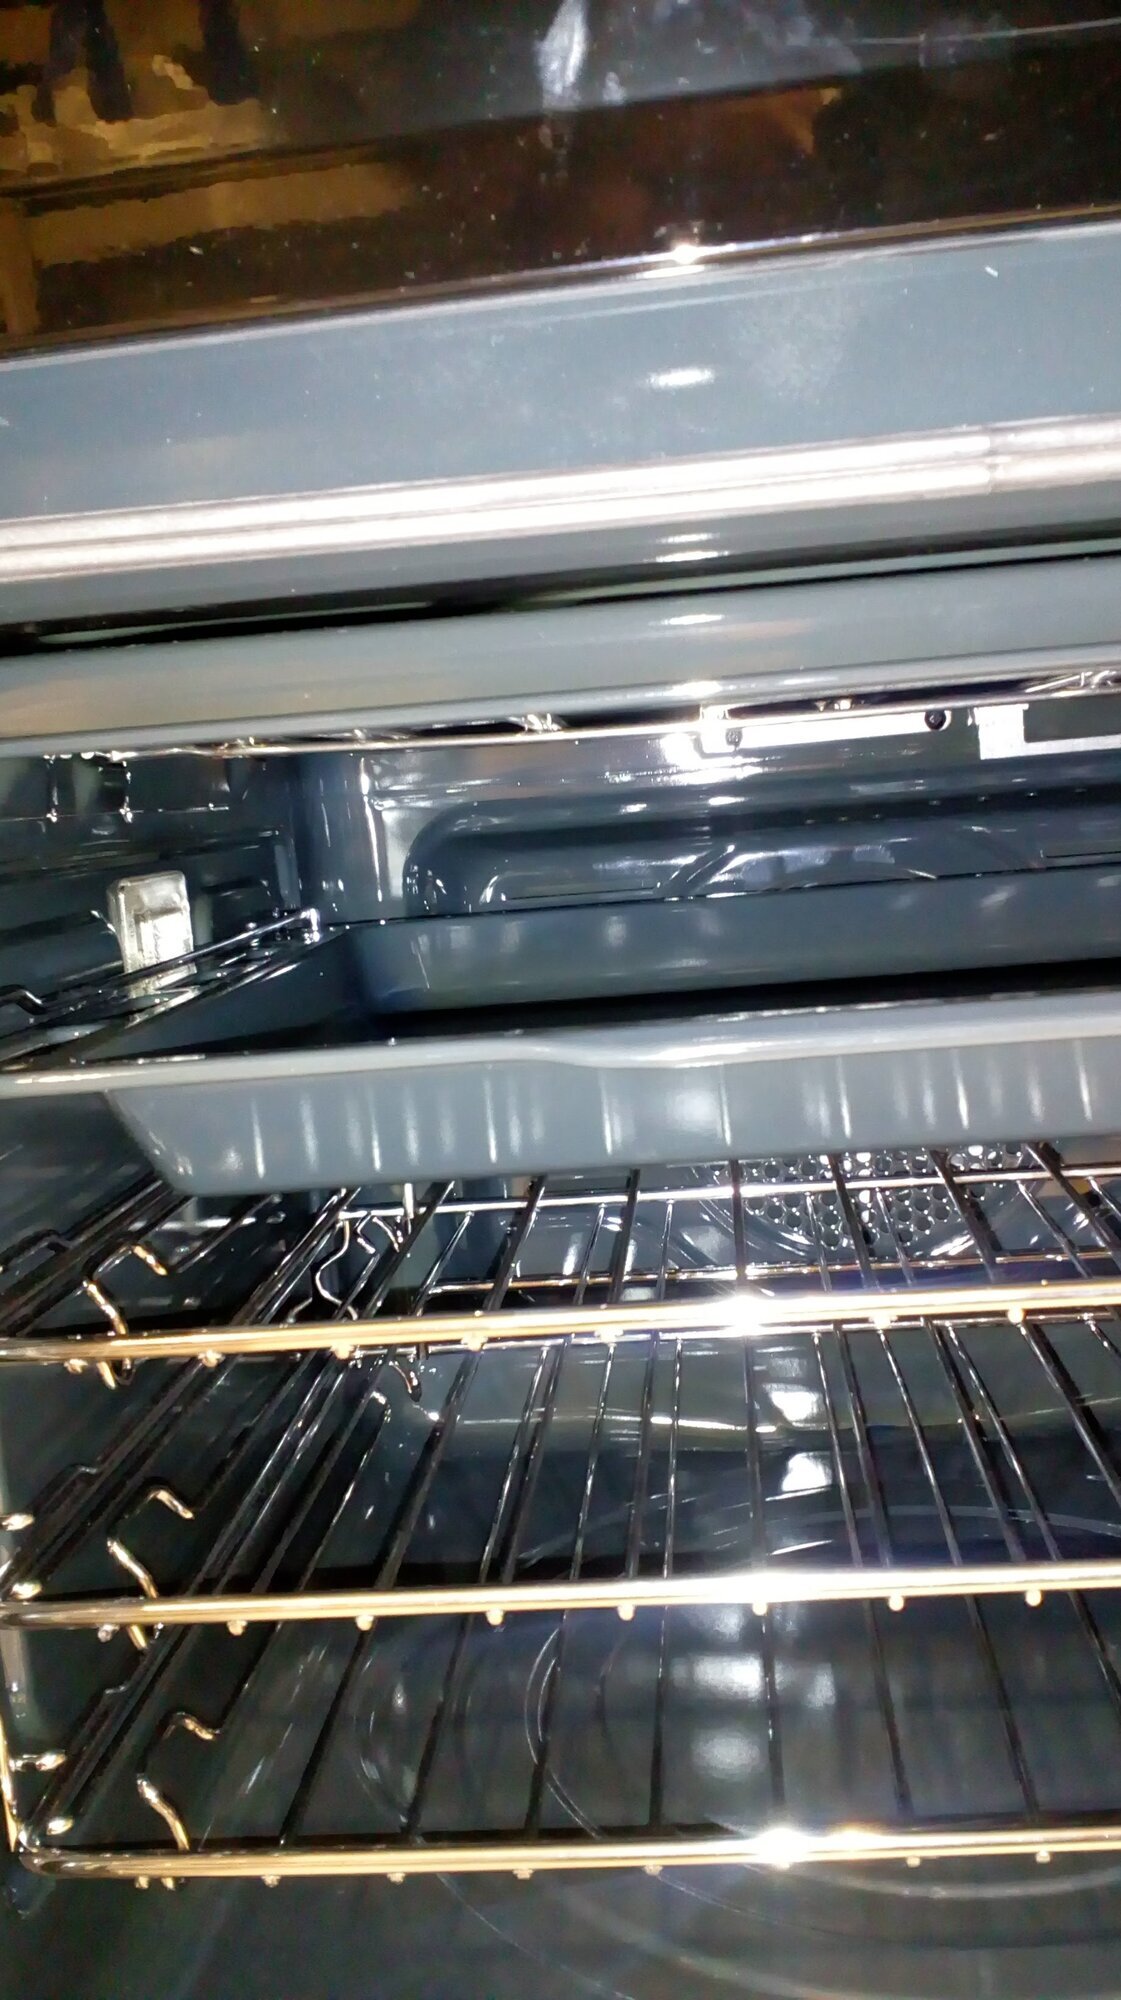 Images First National Oven Clean and Repair